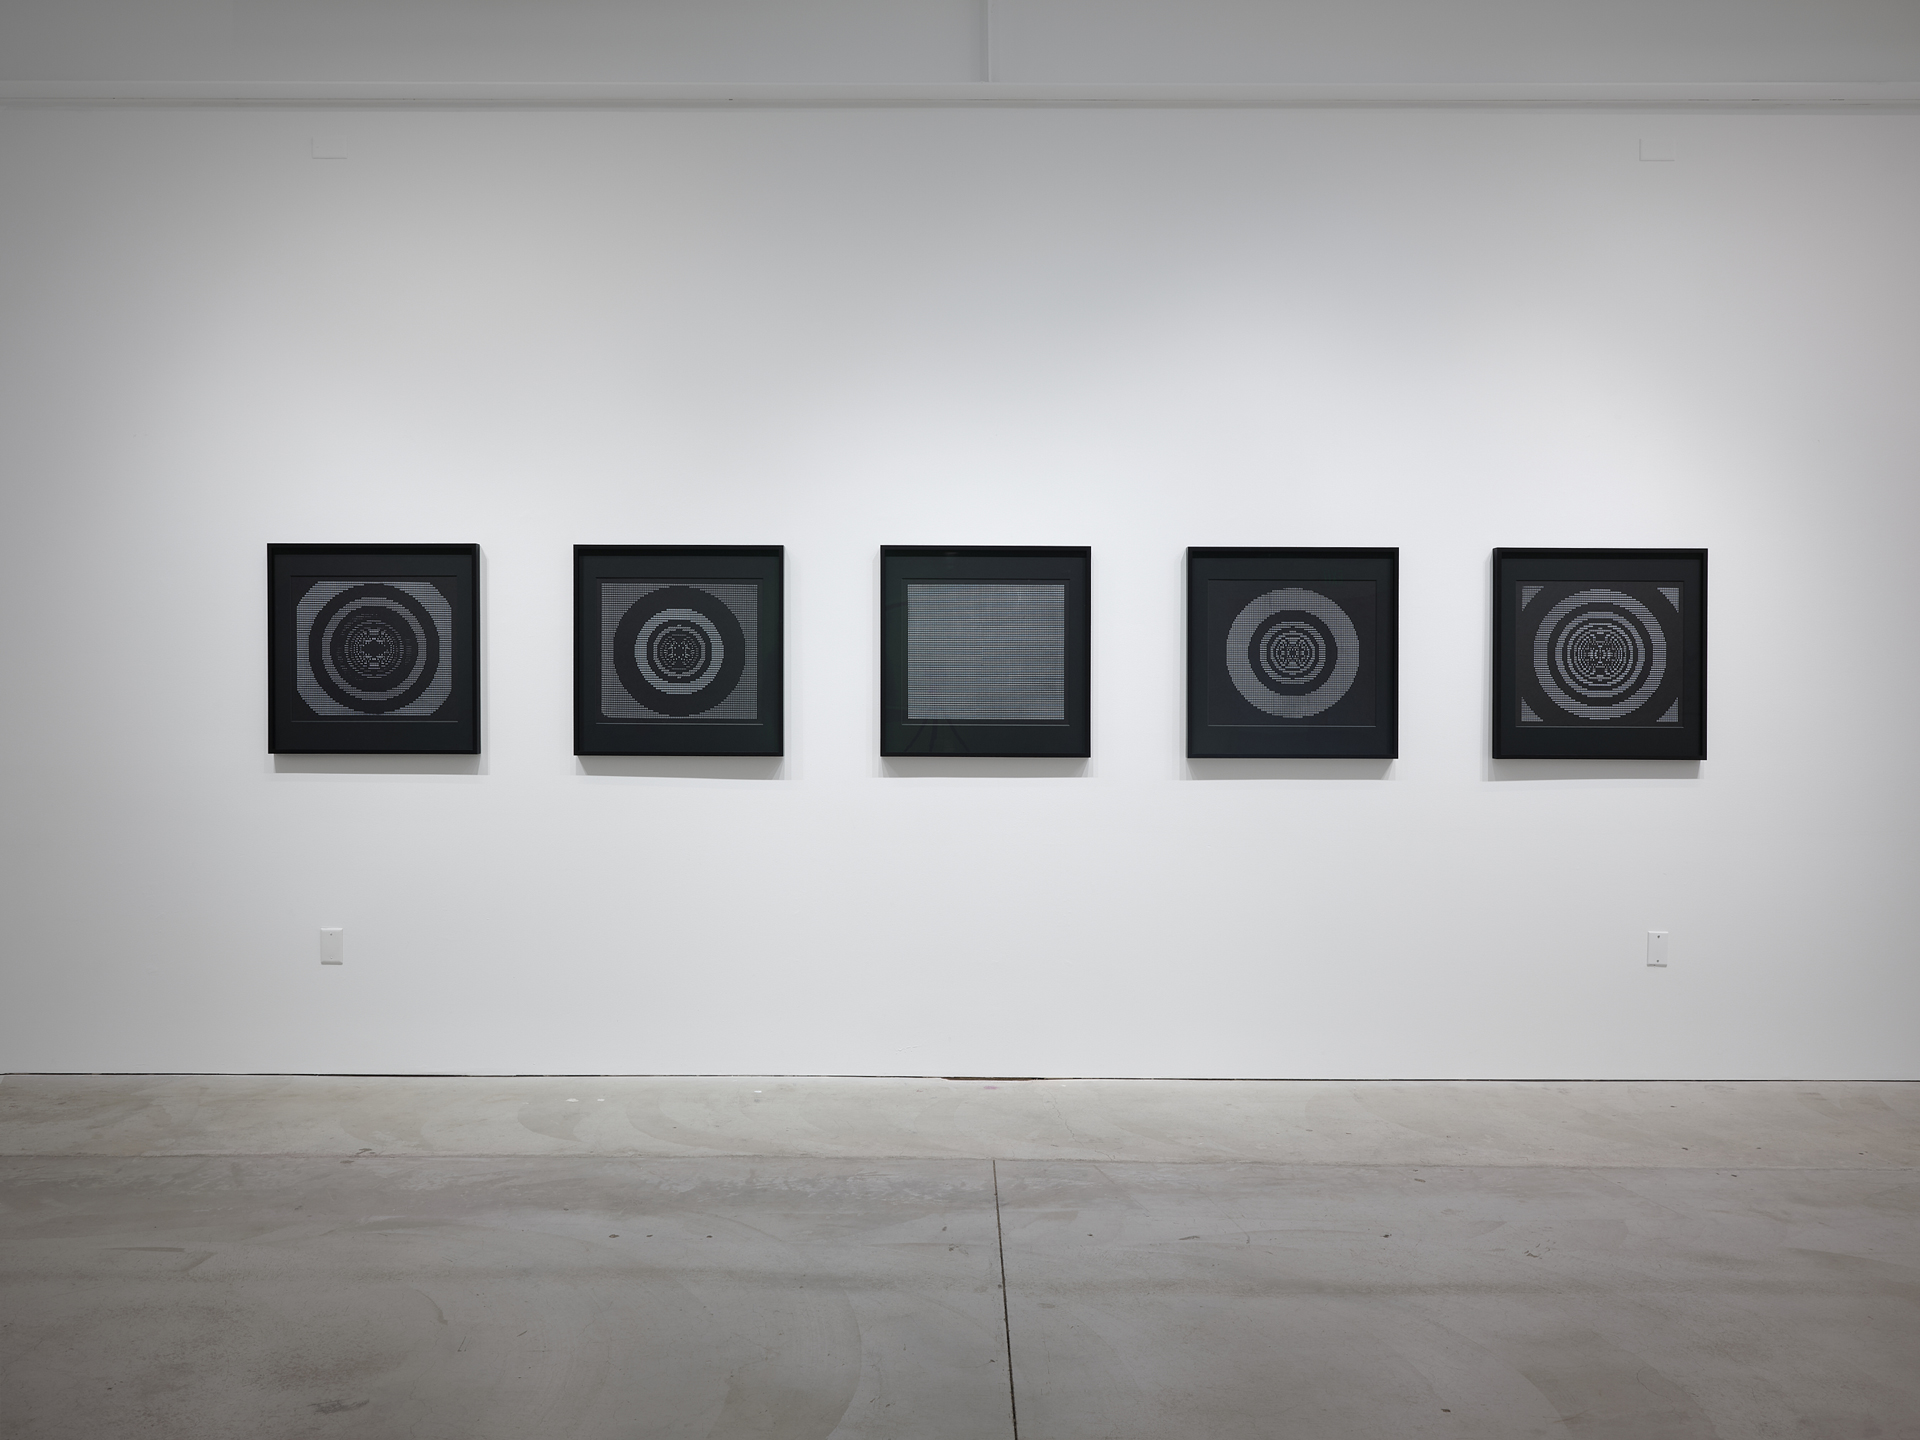 Five framed prints on white wall, each square with circles of white text on black paper